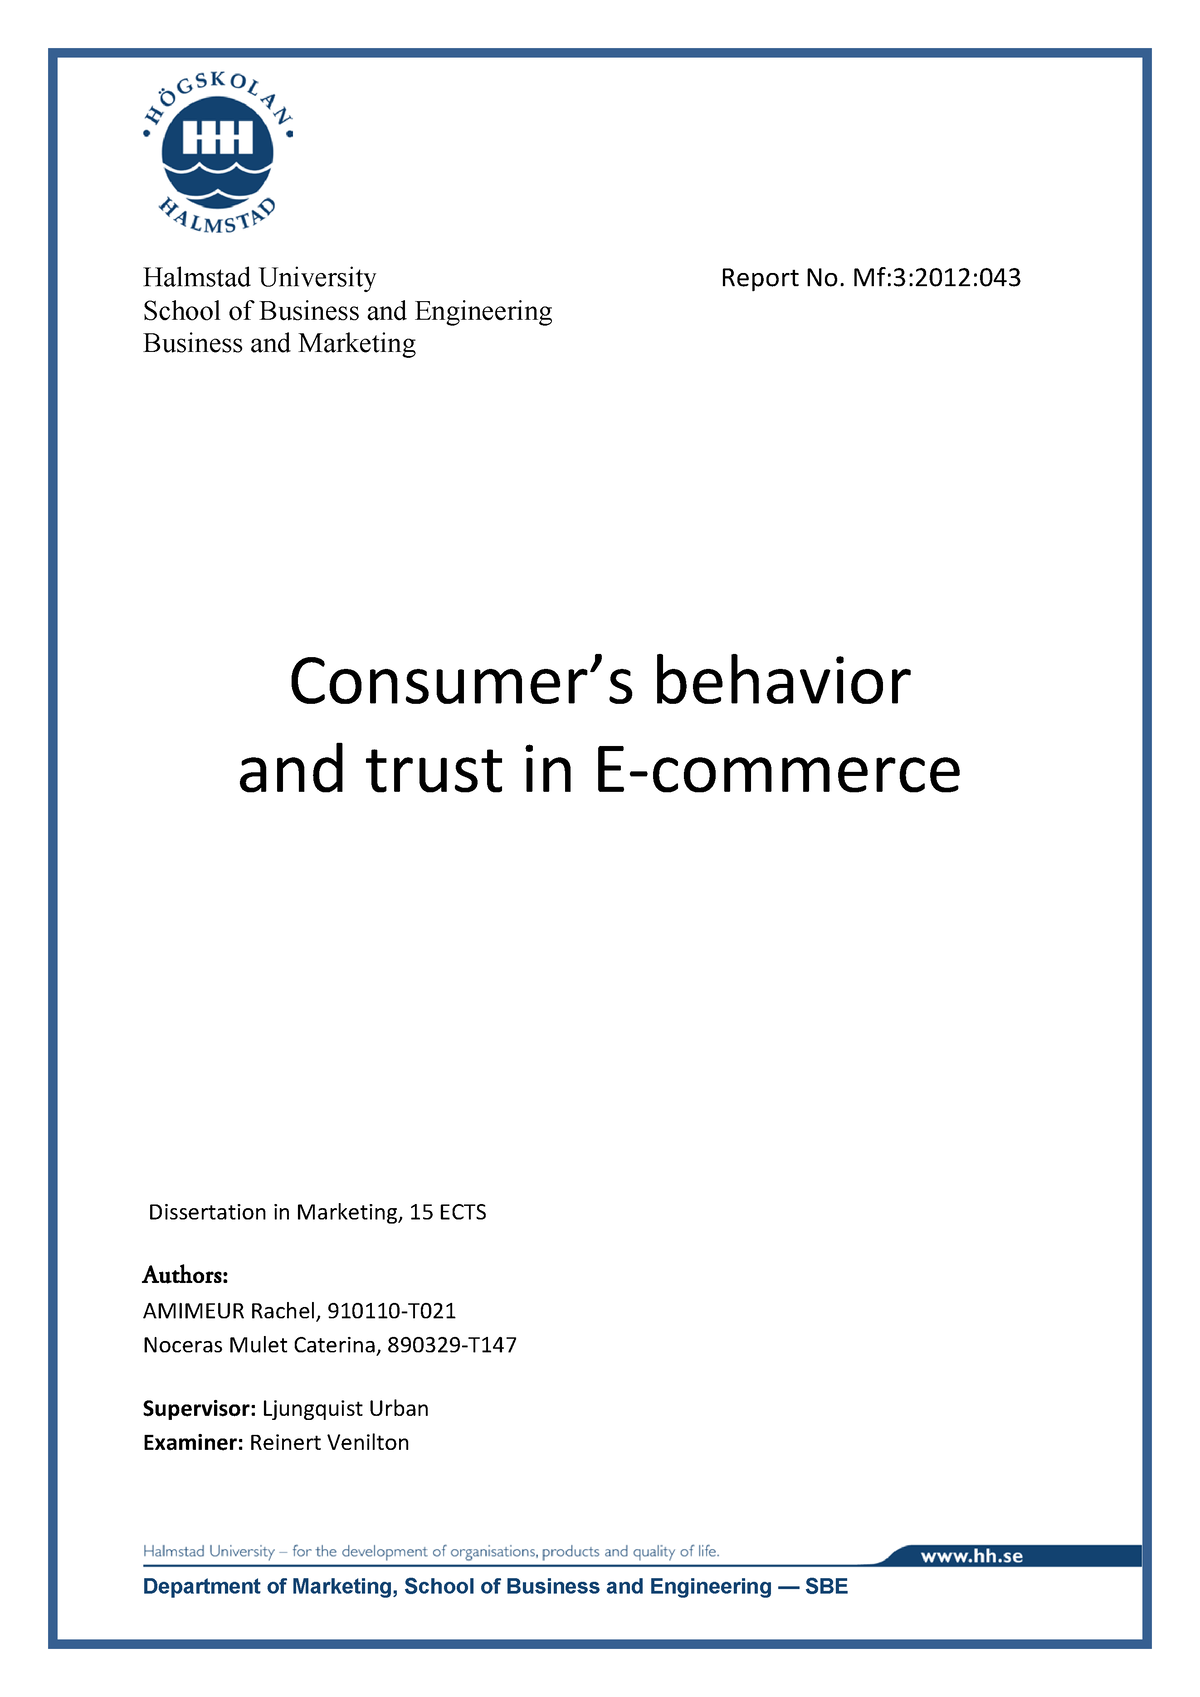 ecommerce thesis titles